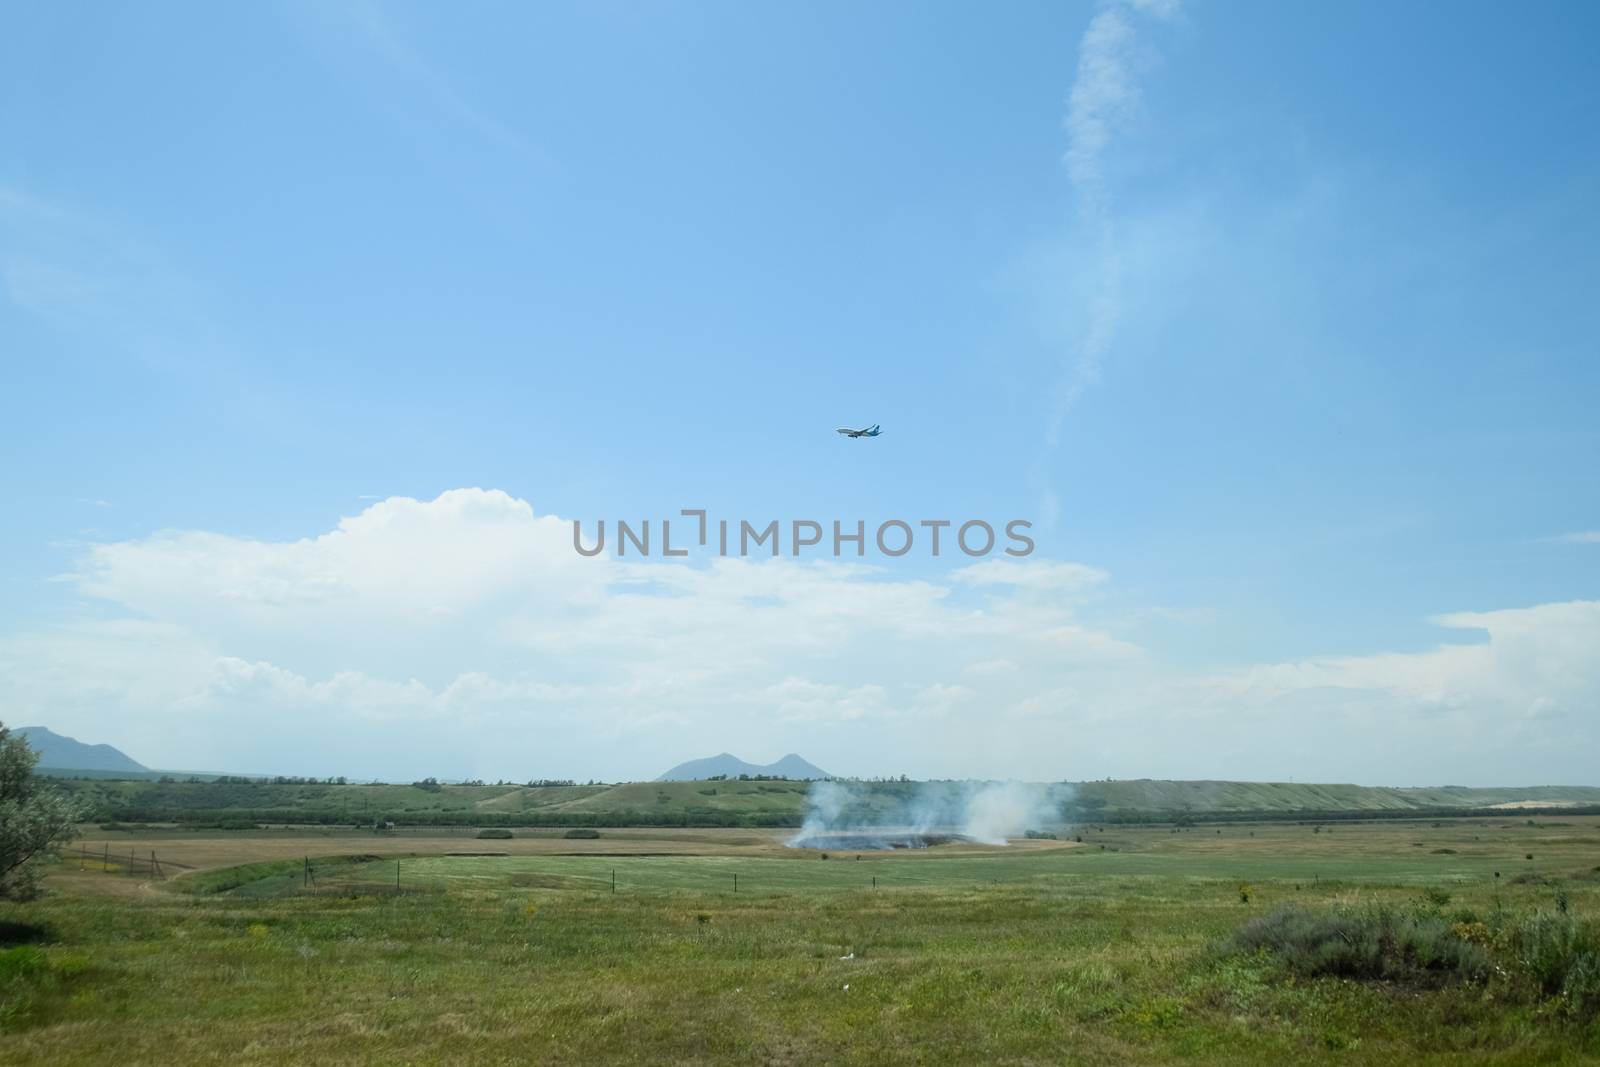 The plane sets up, flying over the field where the dry grass burns